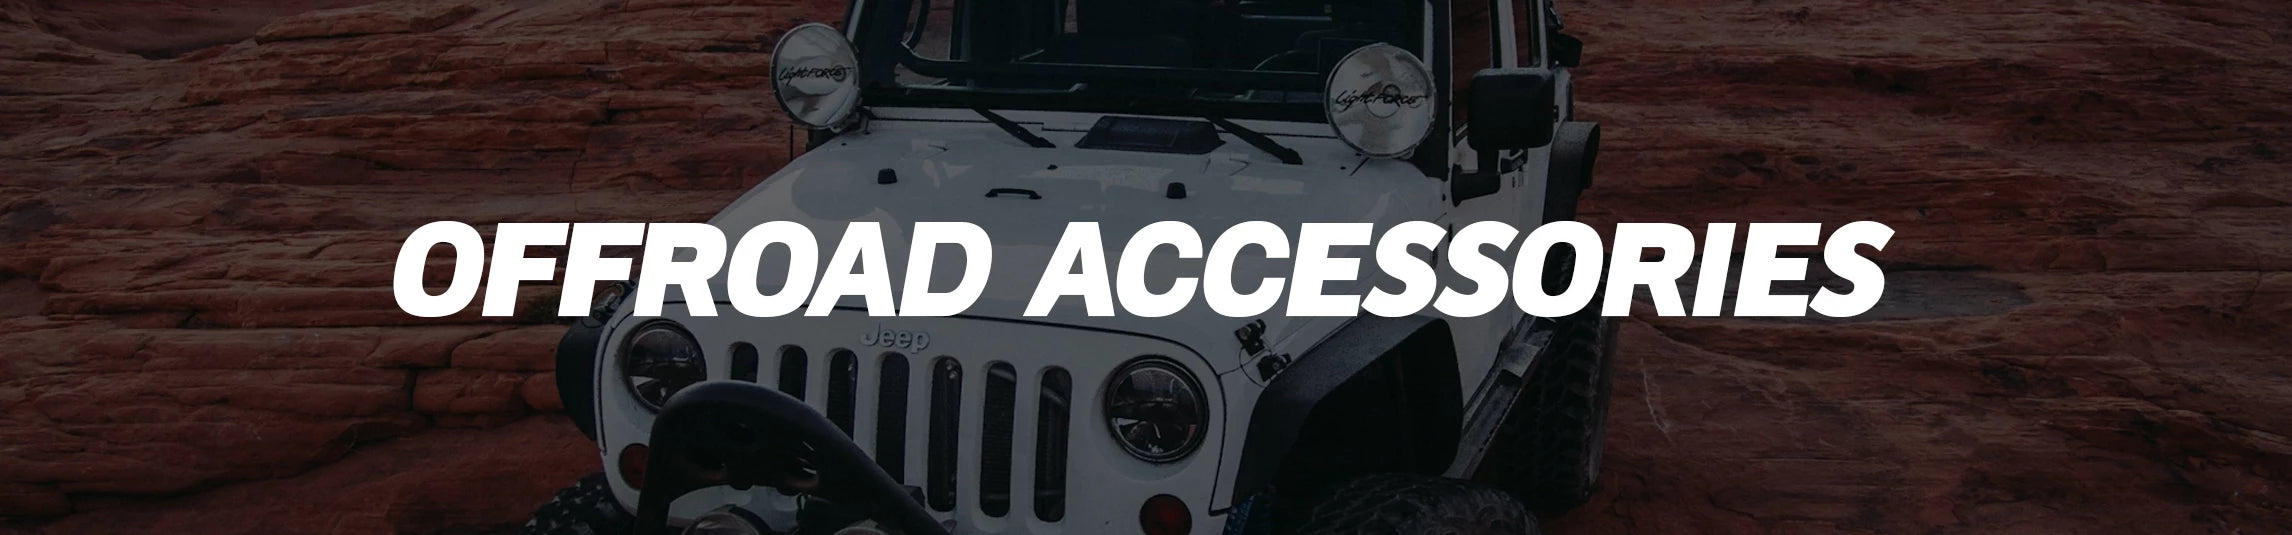 Offroad Accessories